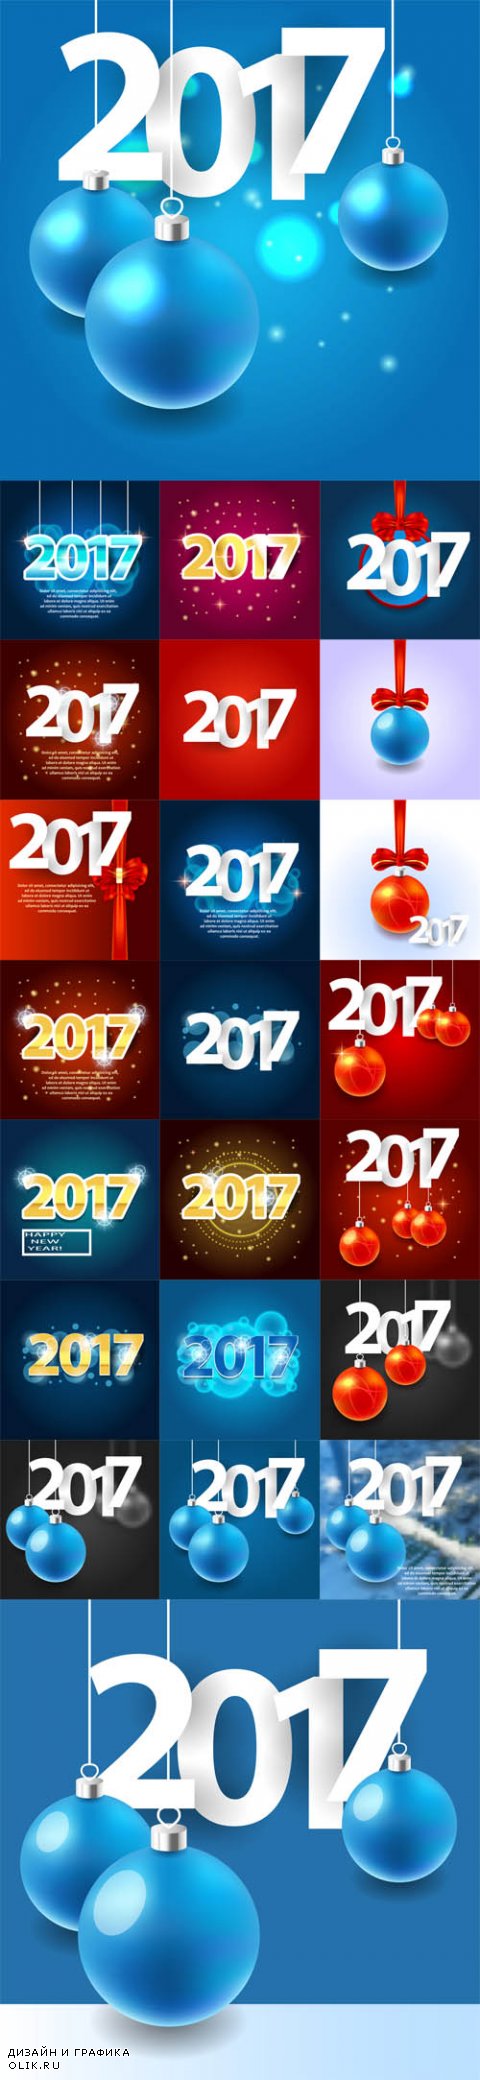 Vector Happy New Year 2017 background. Calendar Template